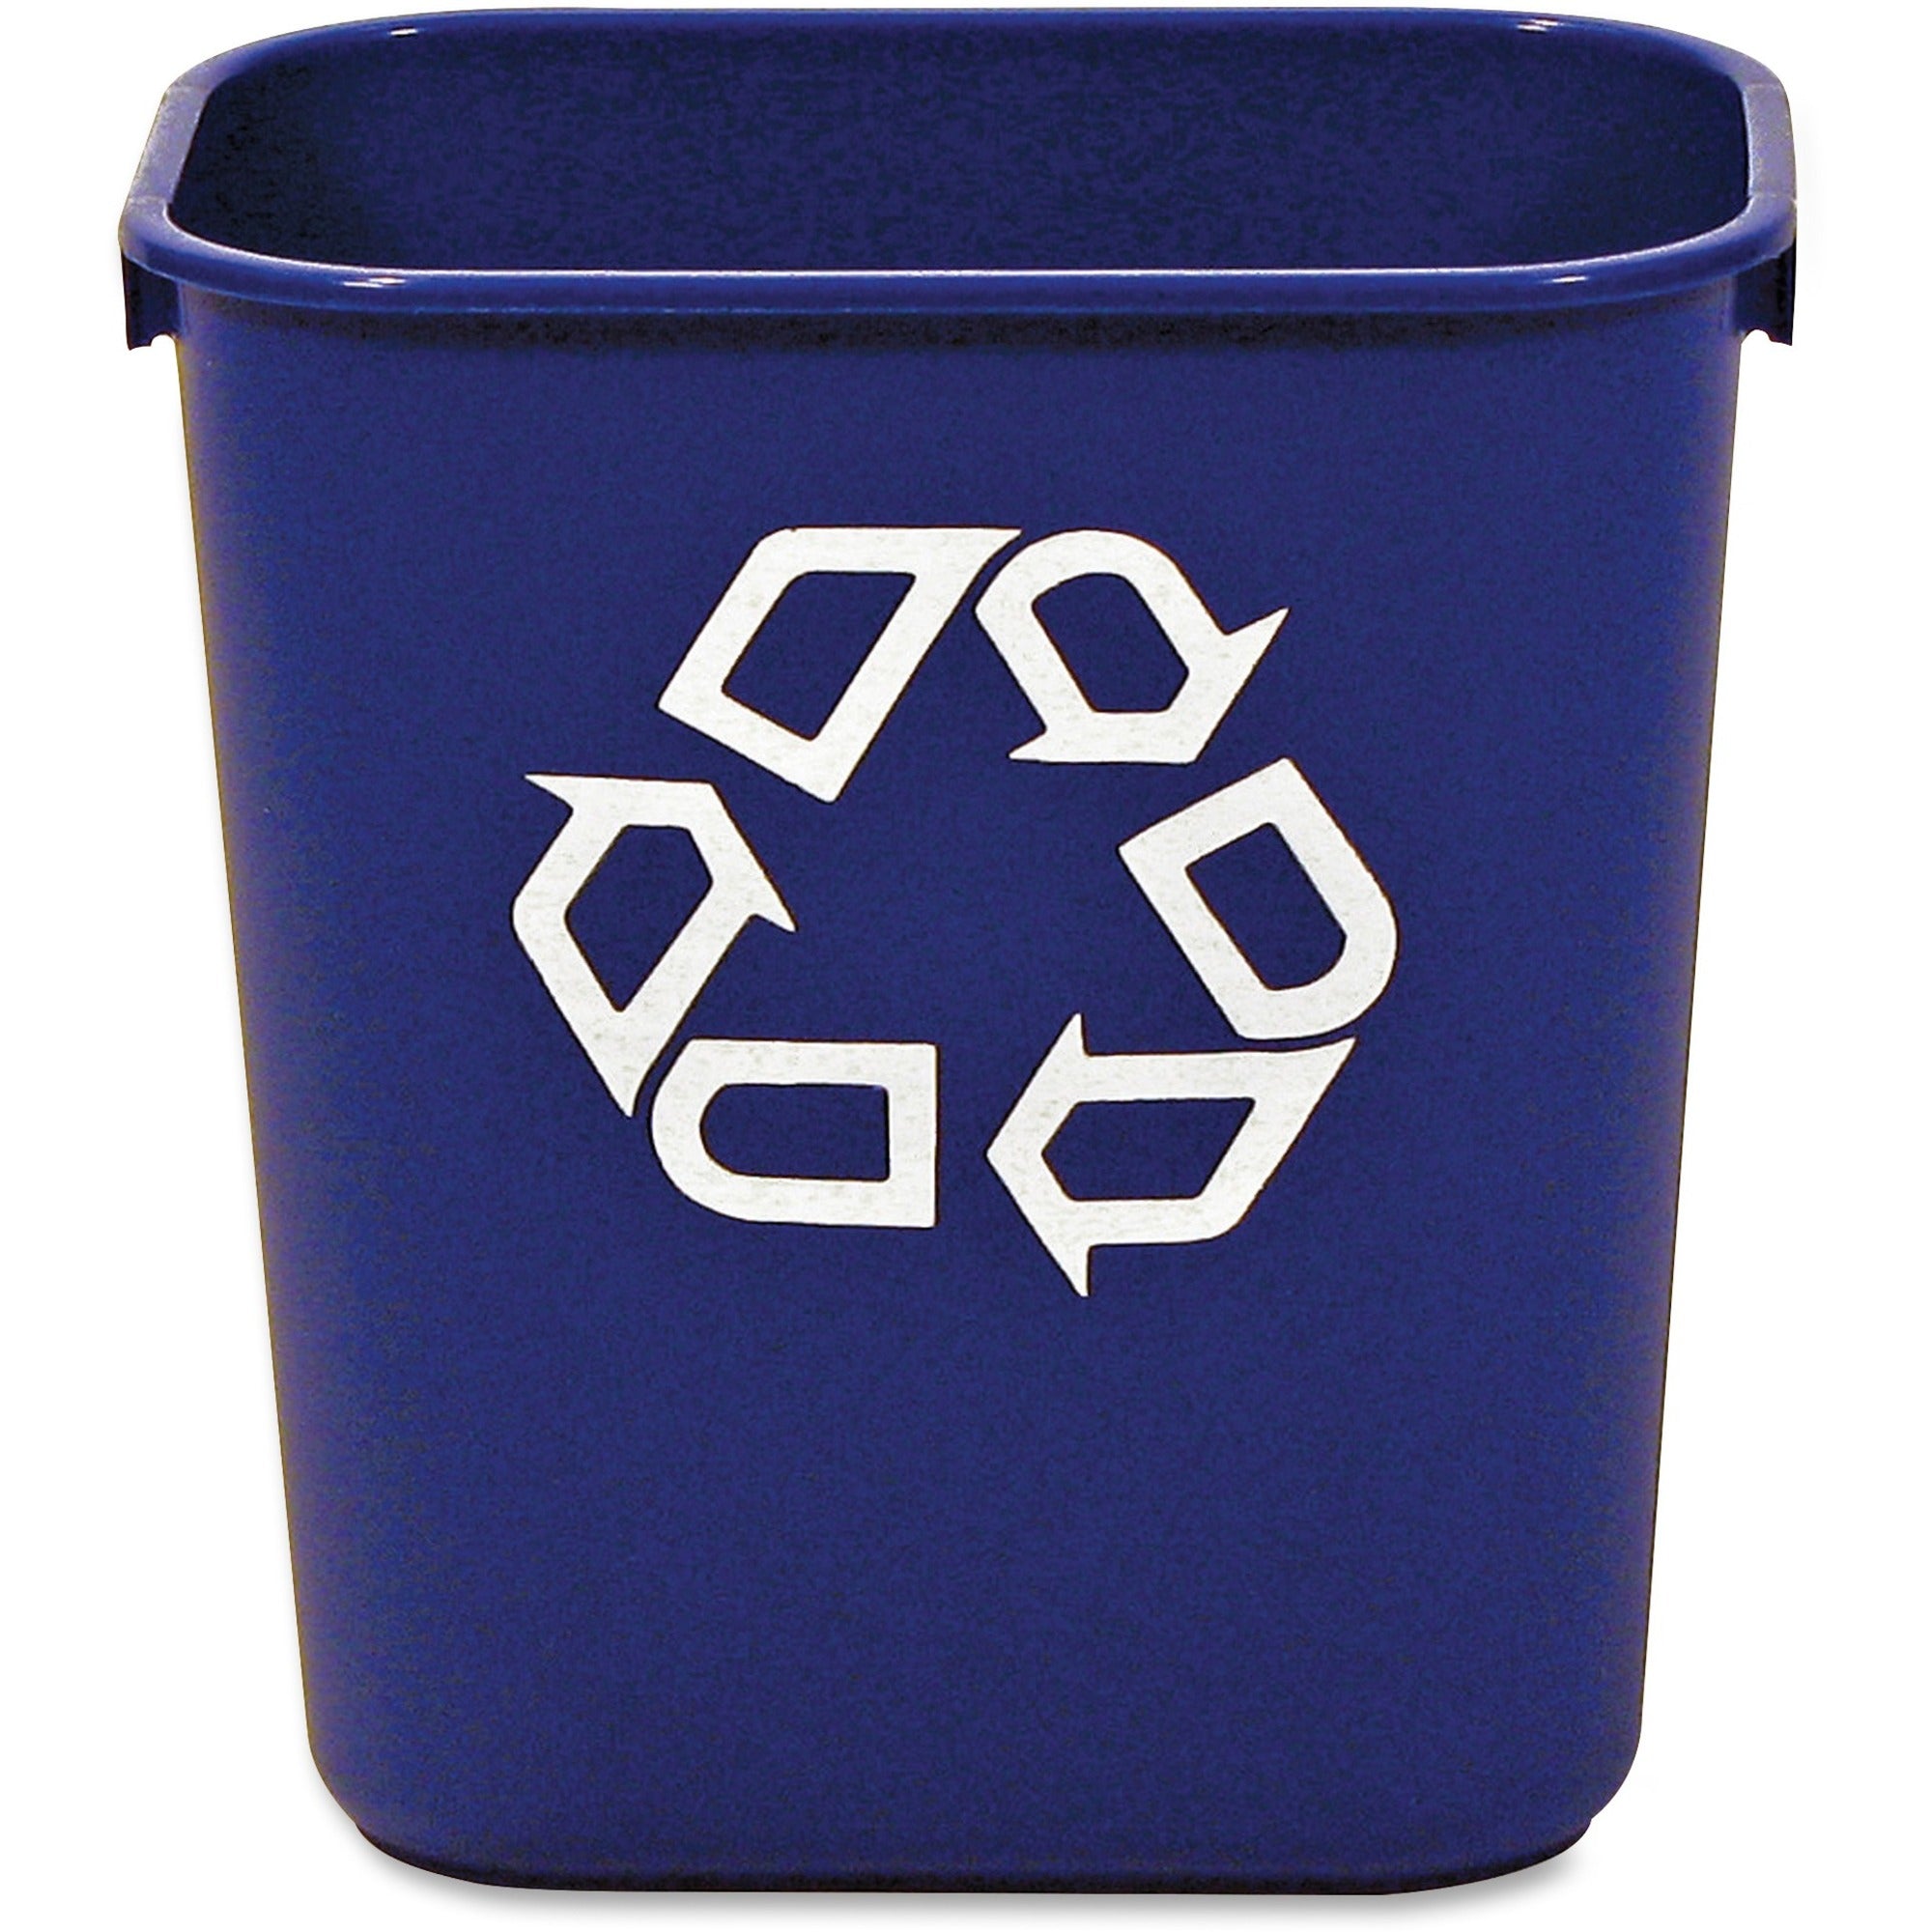 rubbermaid-commercial-13-qt-standard-deskside-recycling-wastebaskets-325-gal-capacity-rectangular-compact-durable-121-height-x-83-width-x-114-depth-resin-blue-12-carton_rcp295573bect - 1